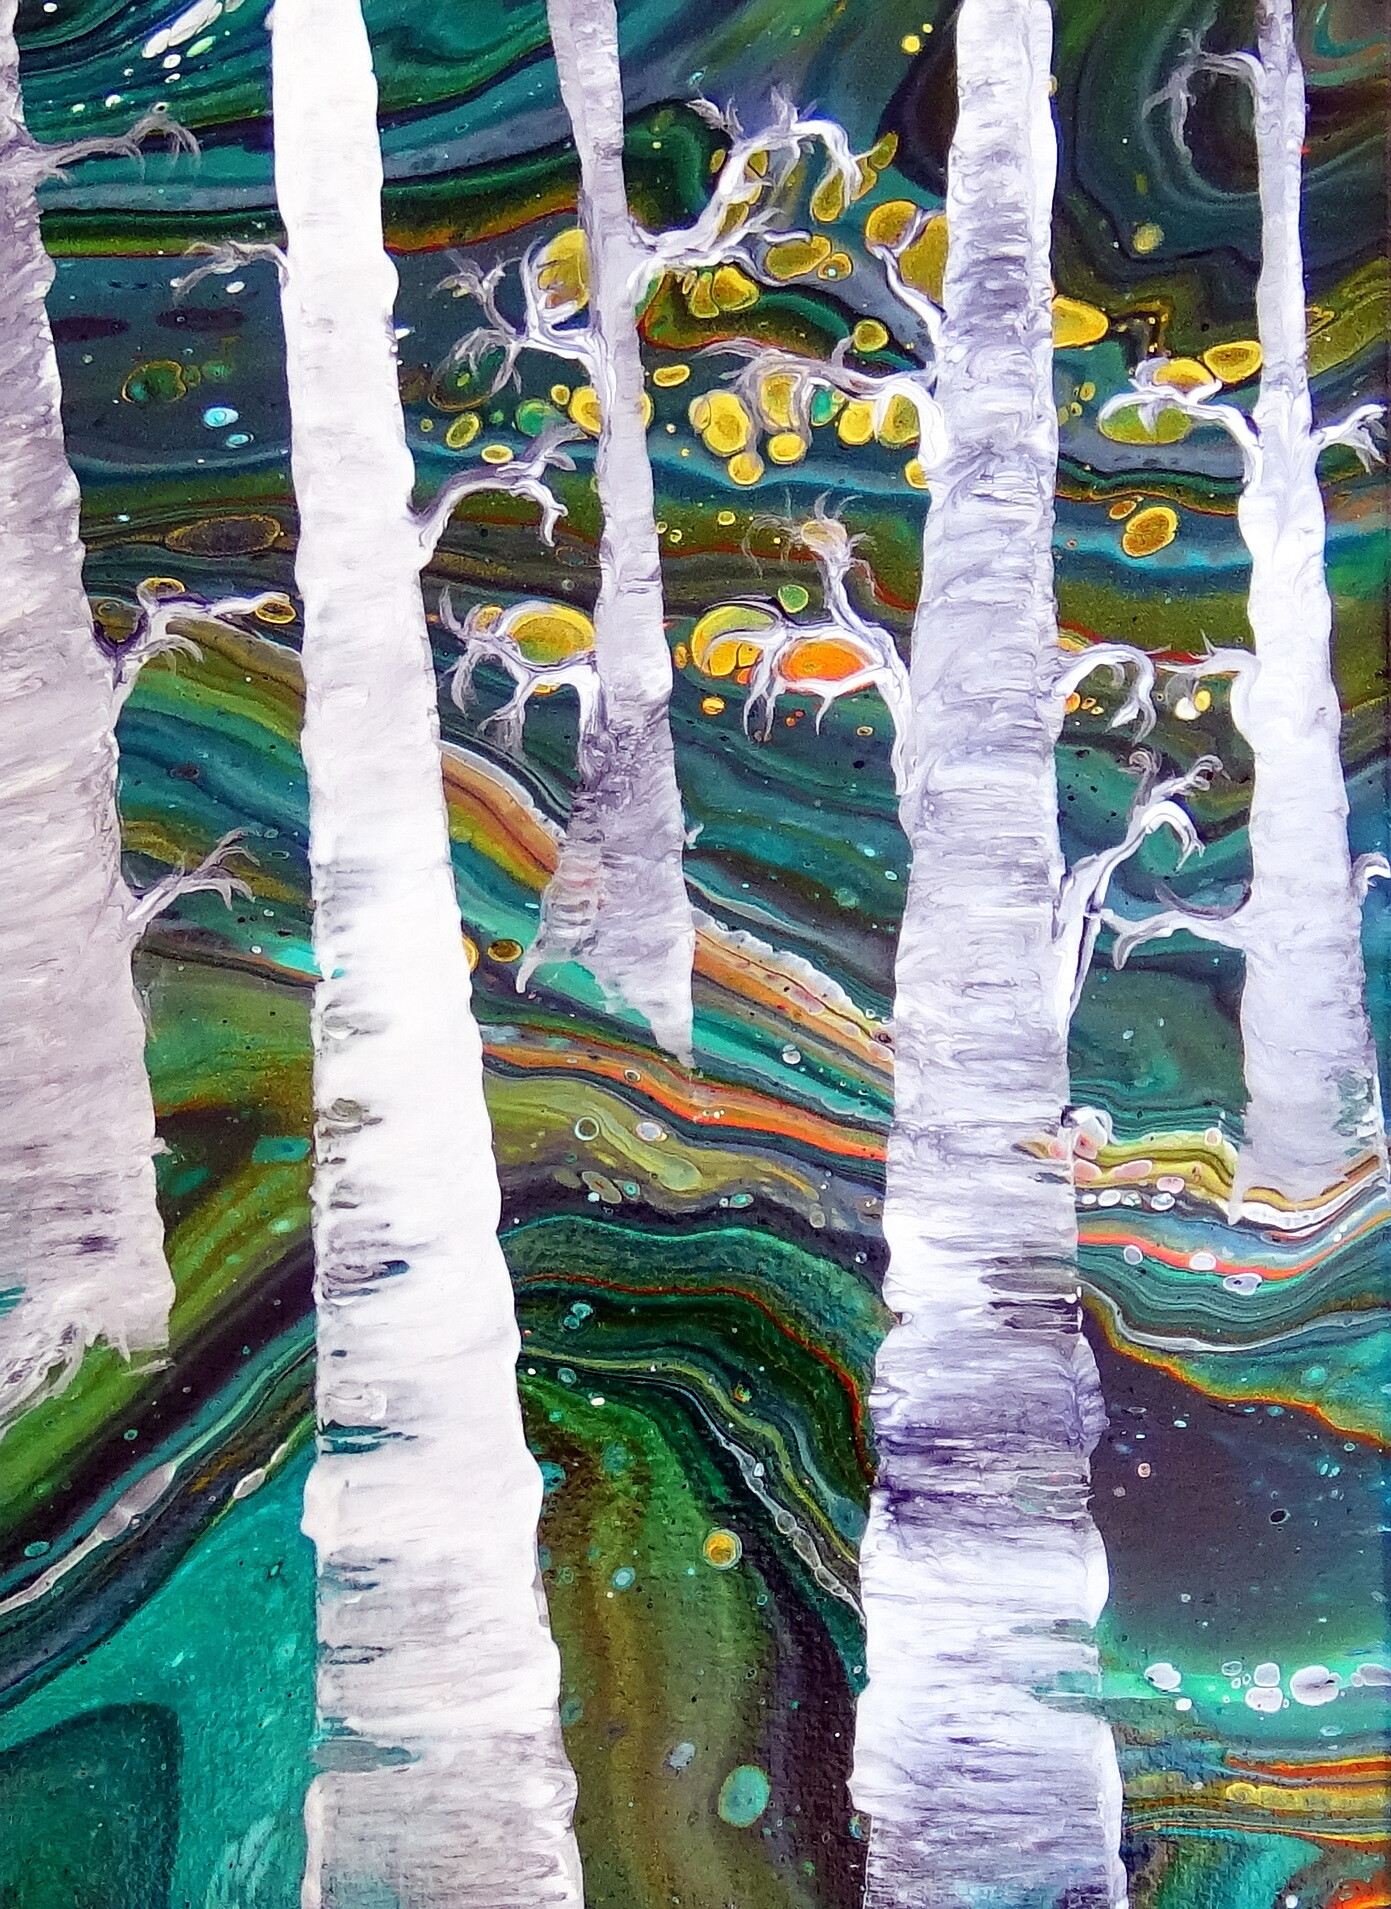 Tips on How to Embellish Acrylic Pour Paintings (and create a new